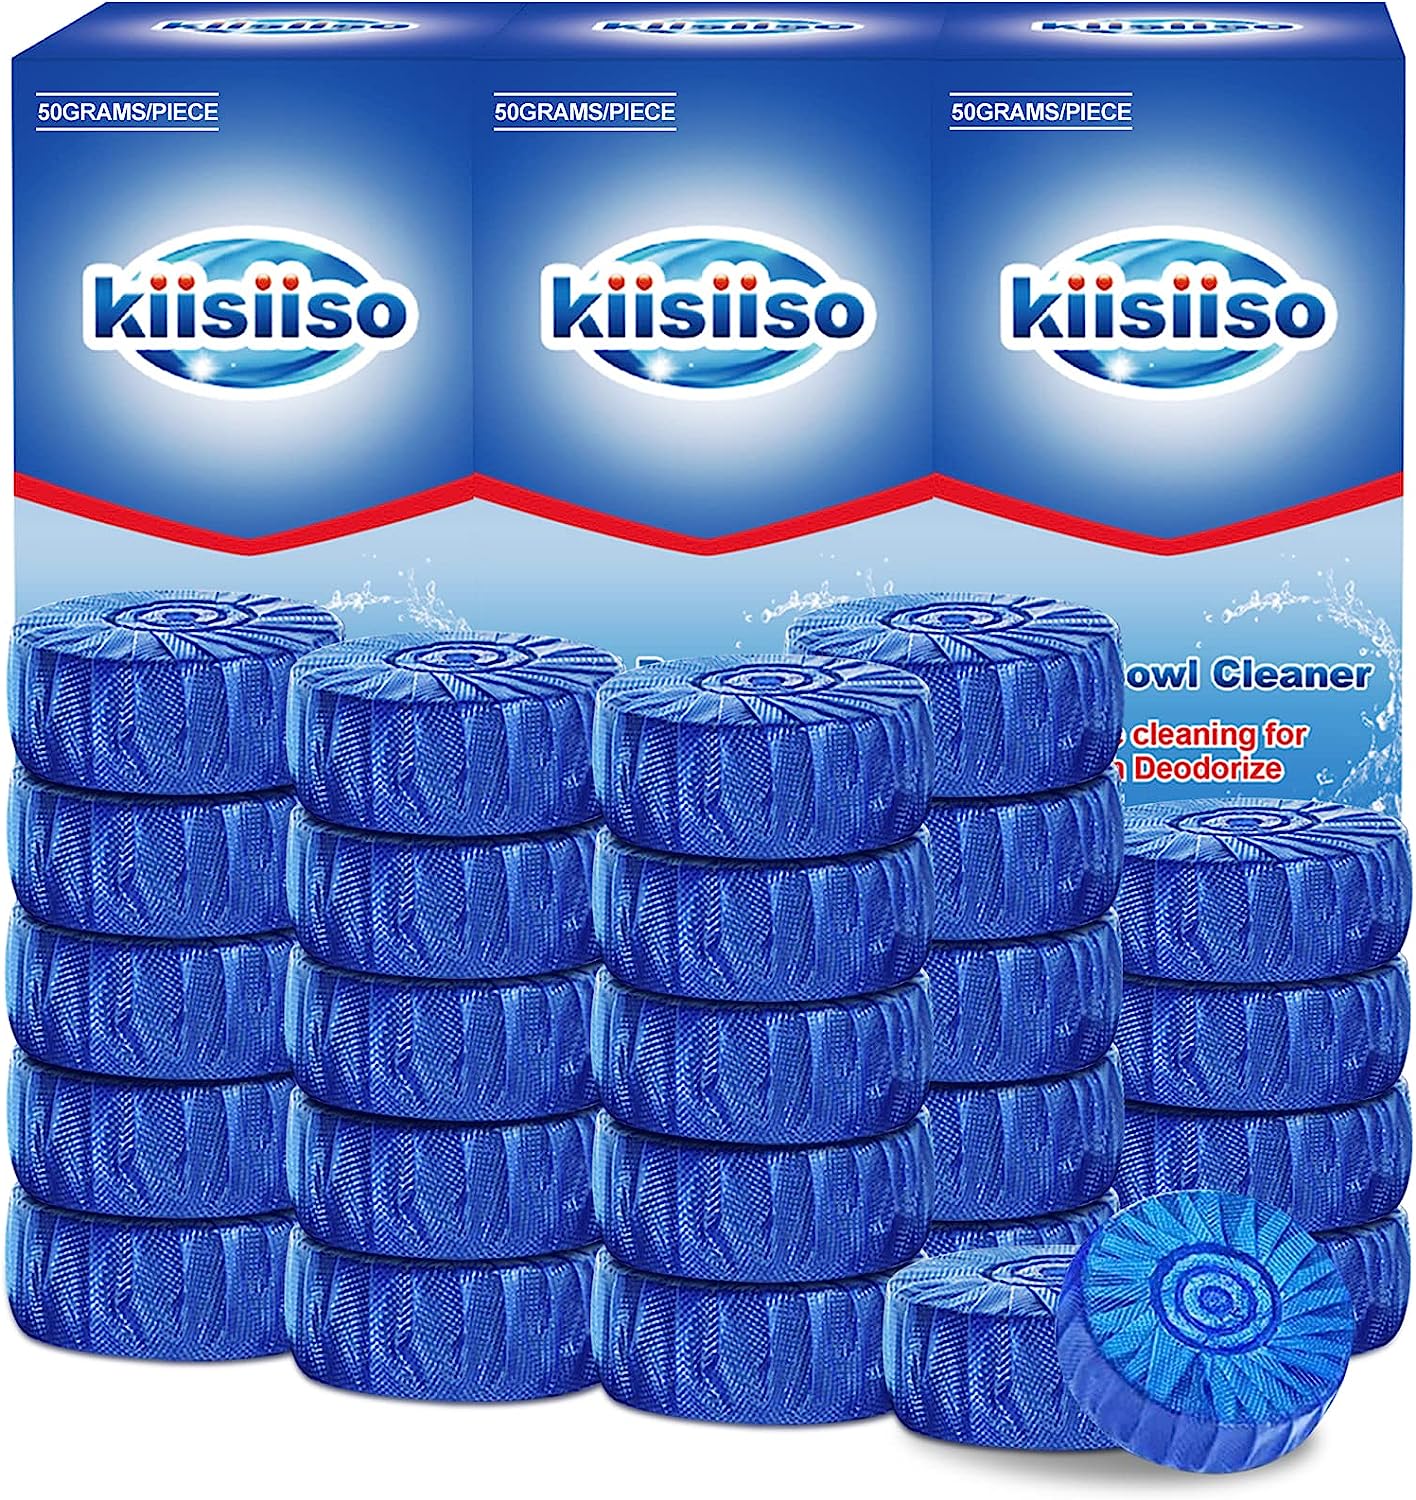 KIISIISO Automatic Toilet Bowl Cleaner [...]